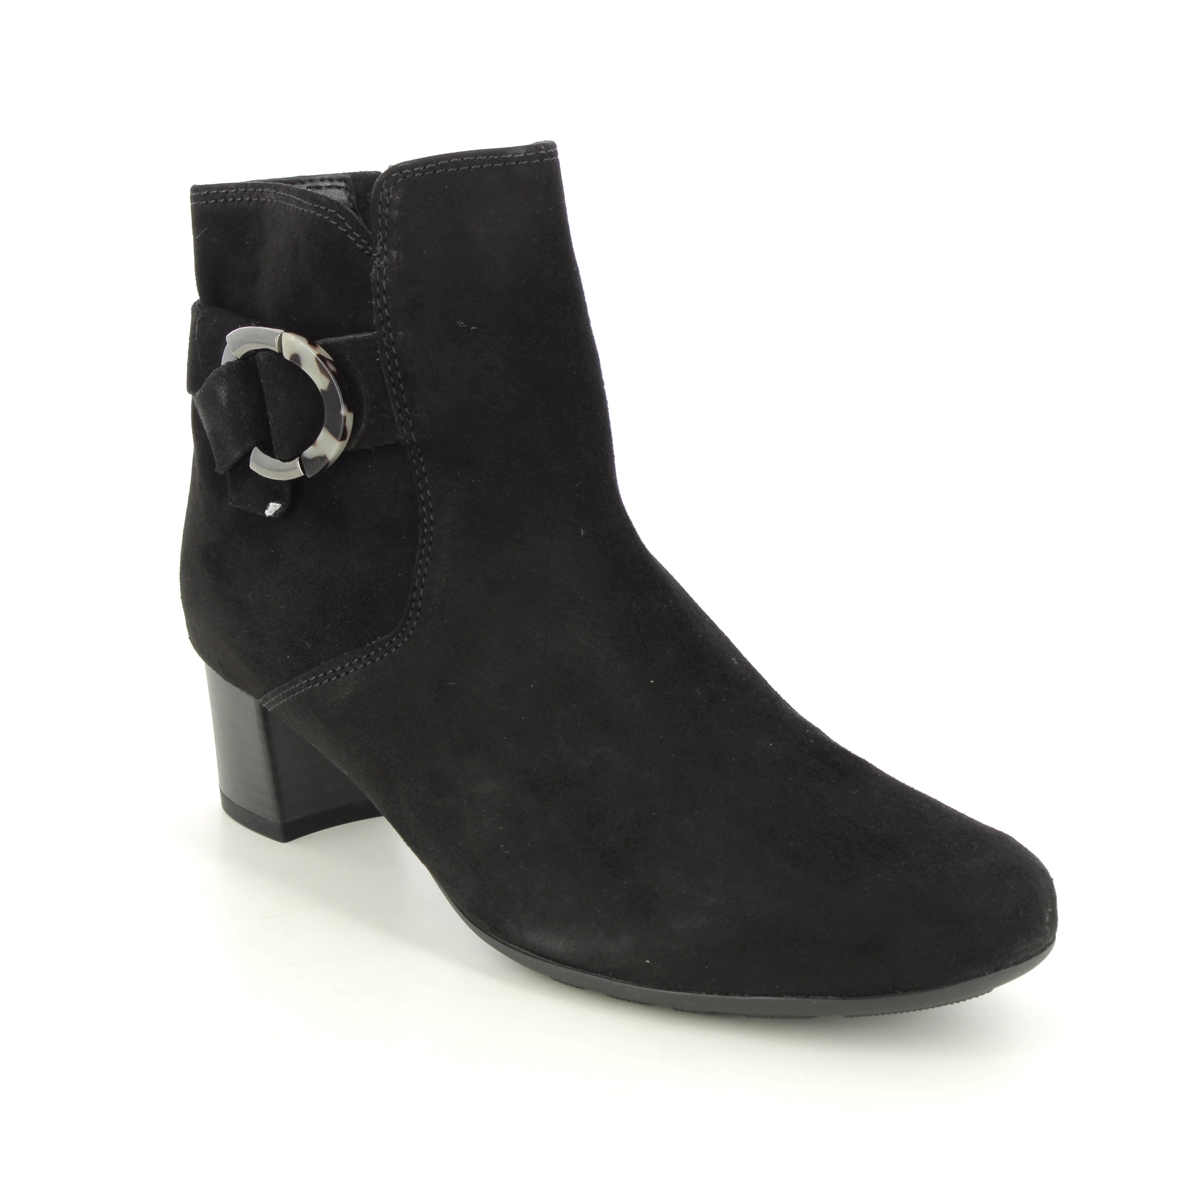 Gabor Hemp Black Suede Womens Heeled Boots 92.824.47 in a Plain Leather in Size 6